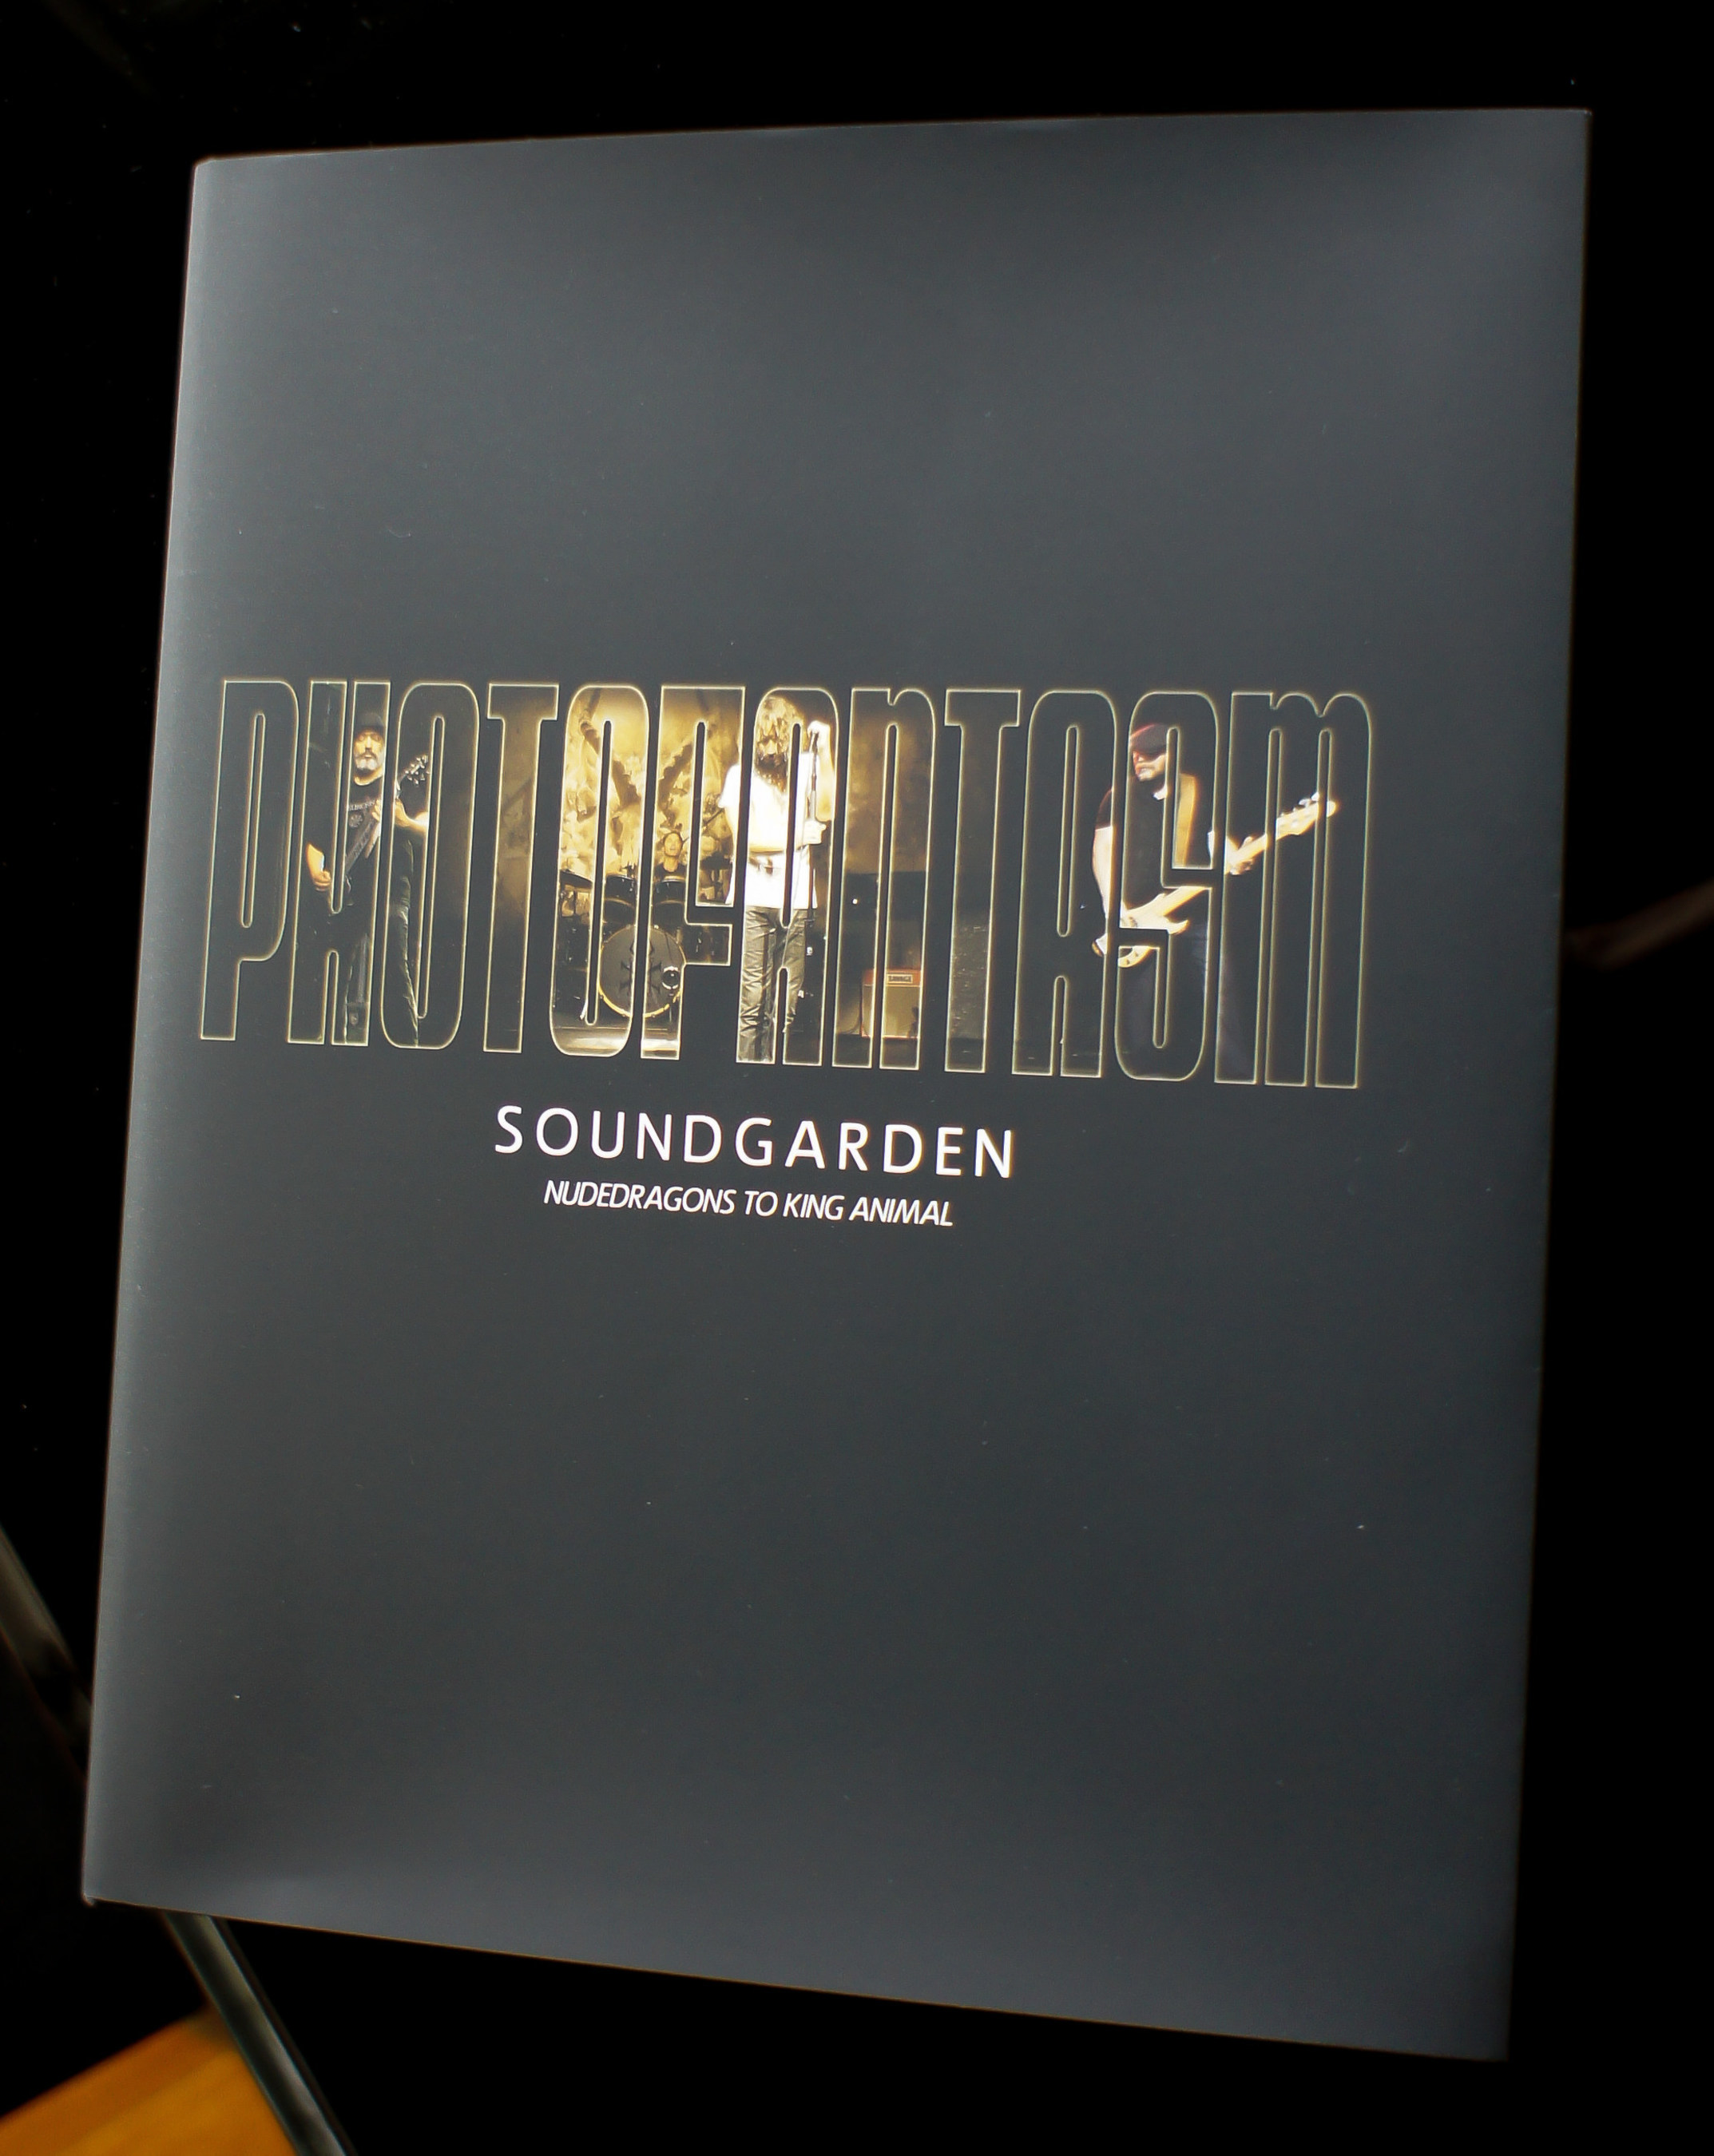 Soundgarden's Fan Created Book Photofantasm is Receiving Rave Reviews --  Net Proceeds Going To Cancer Foundation